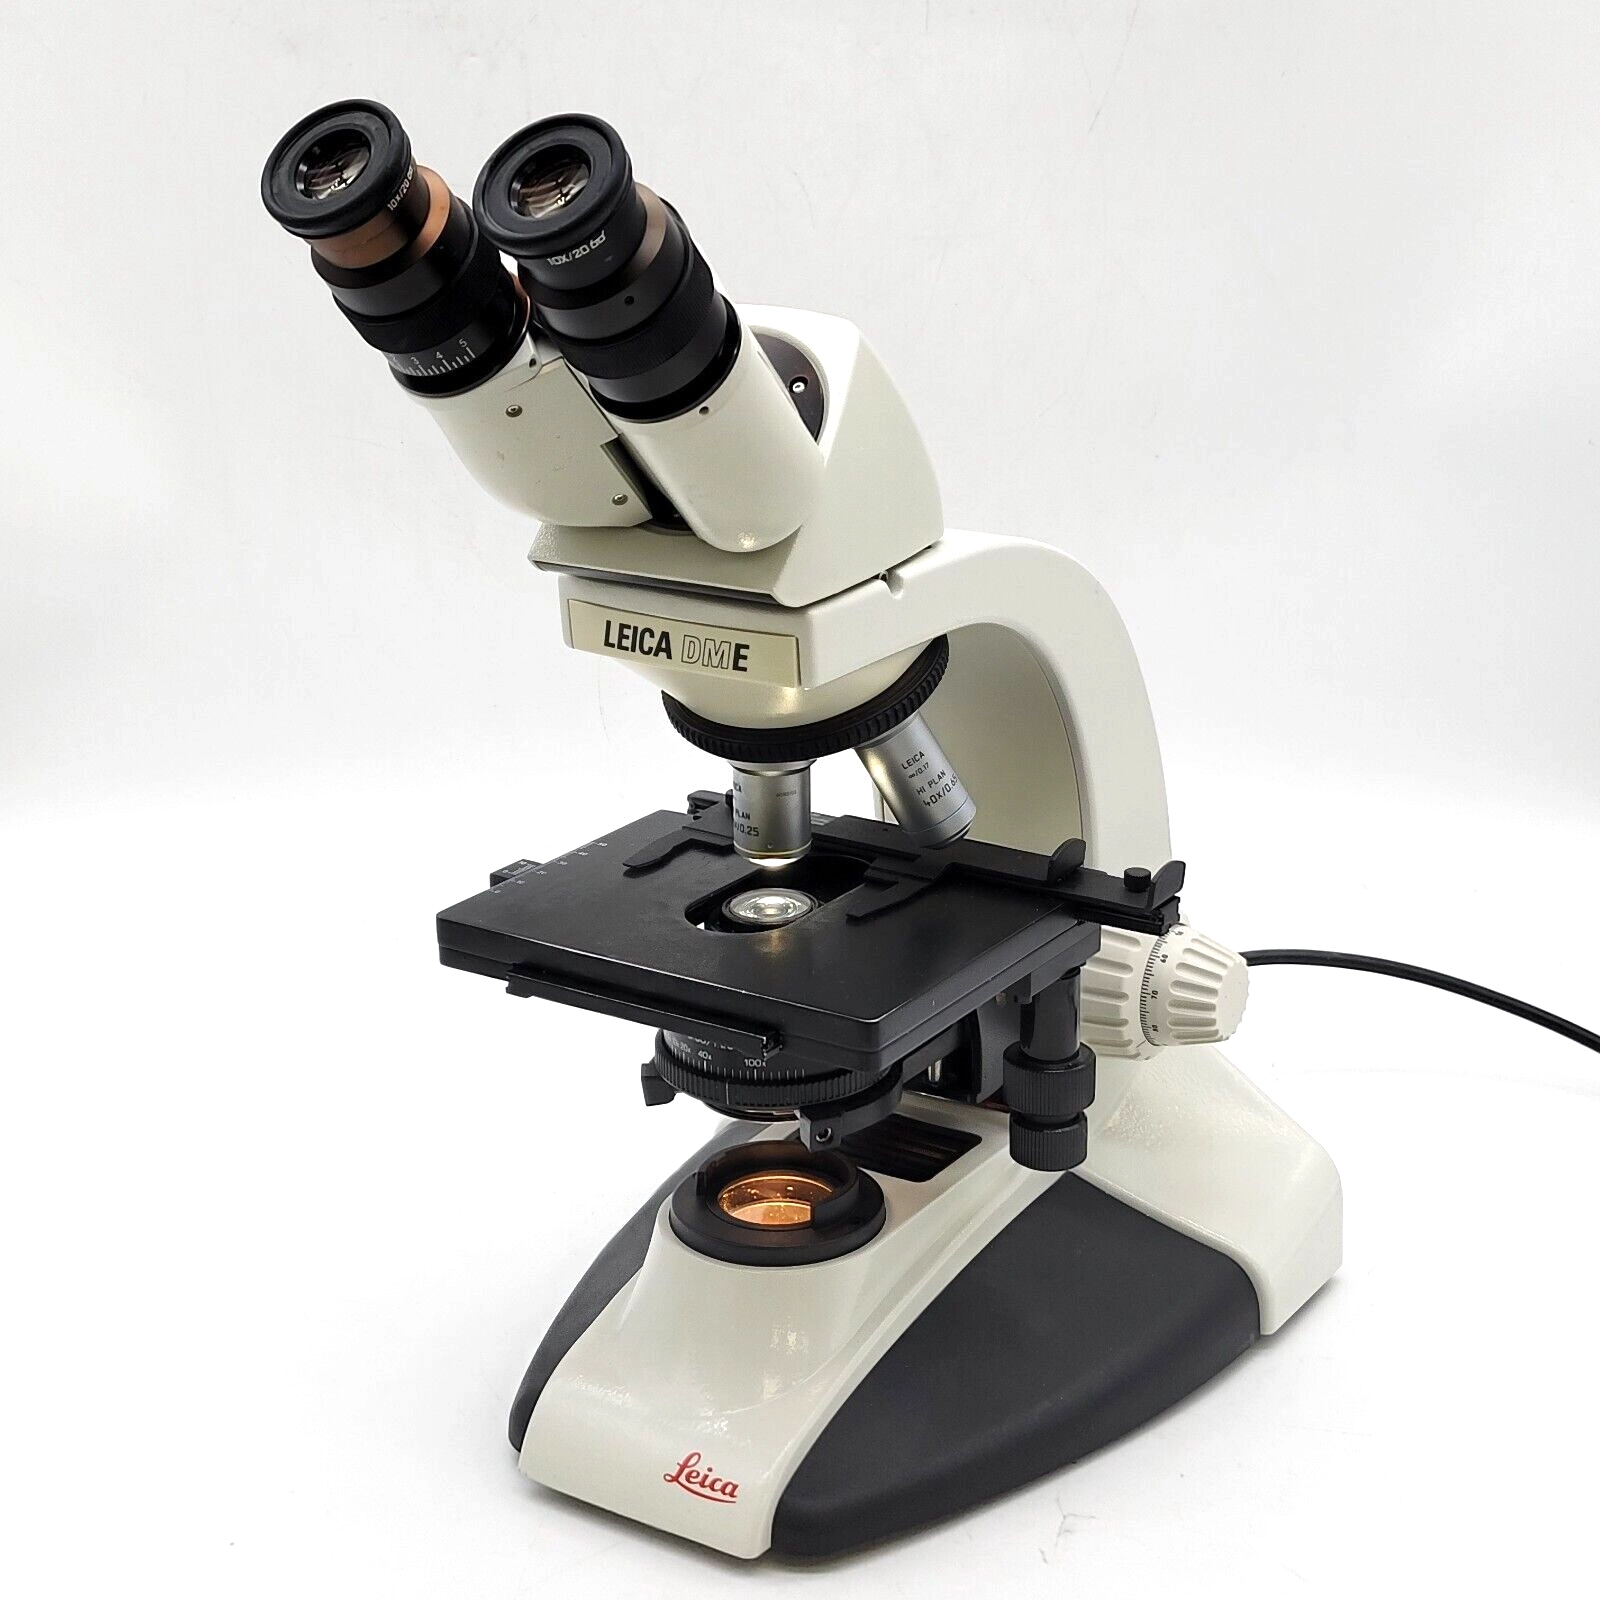 Leica Microscope DME with HI Plan 4x, 10x, 40x Objectives